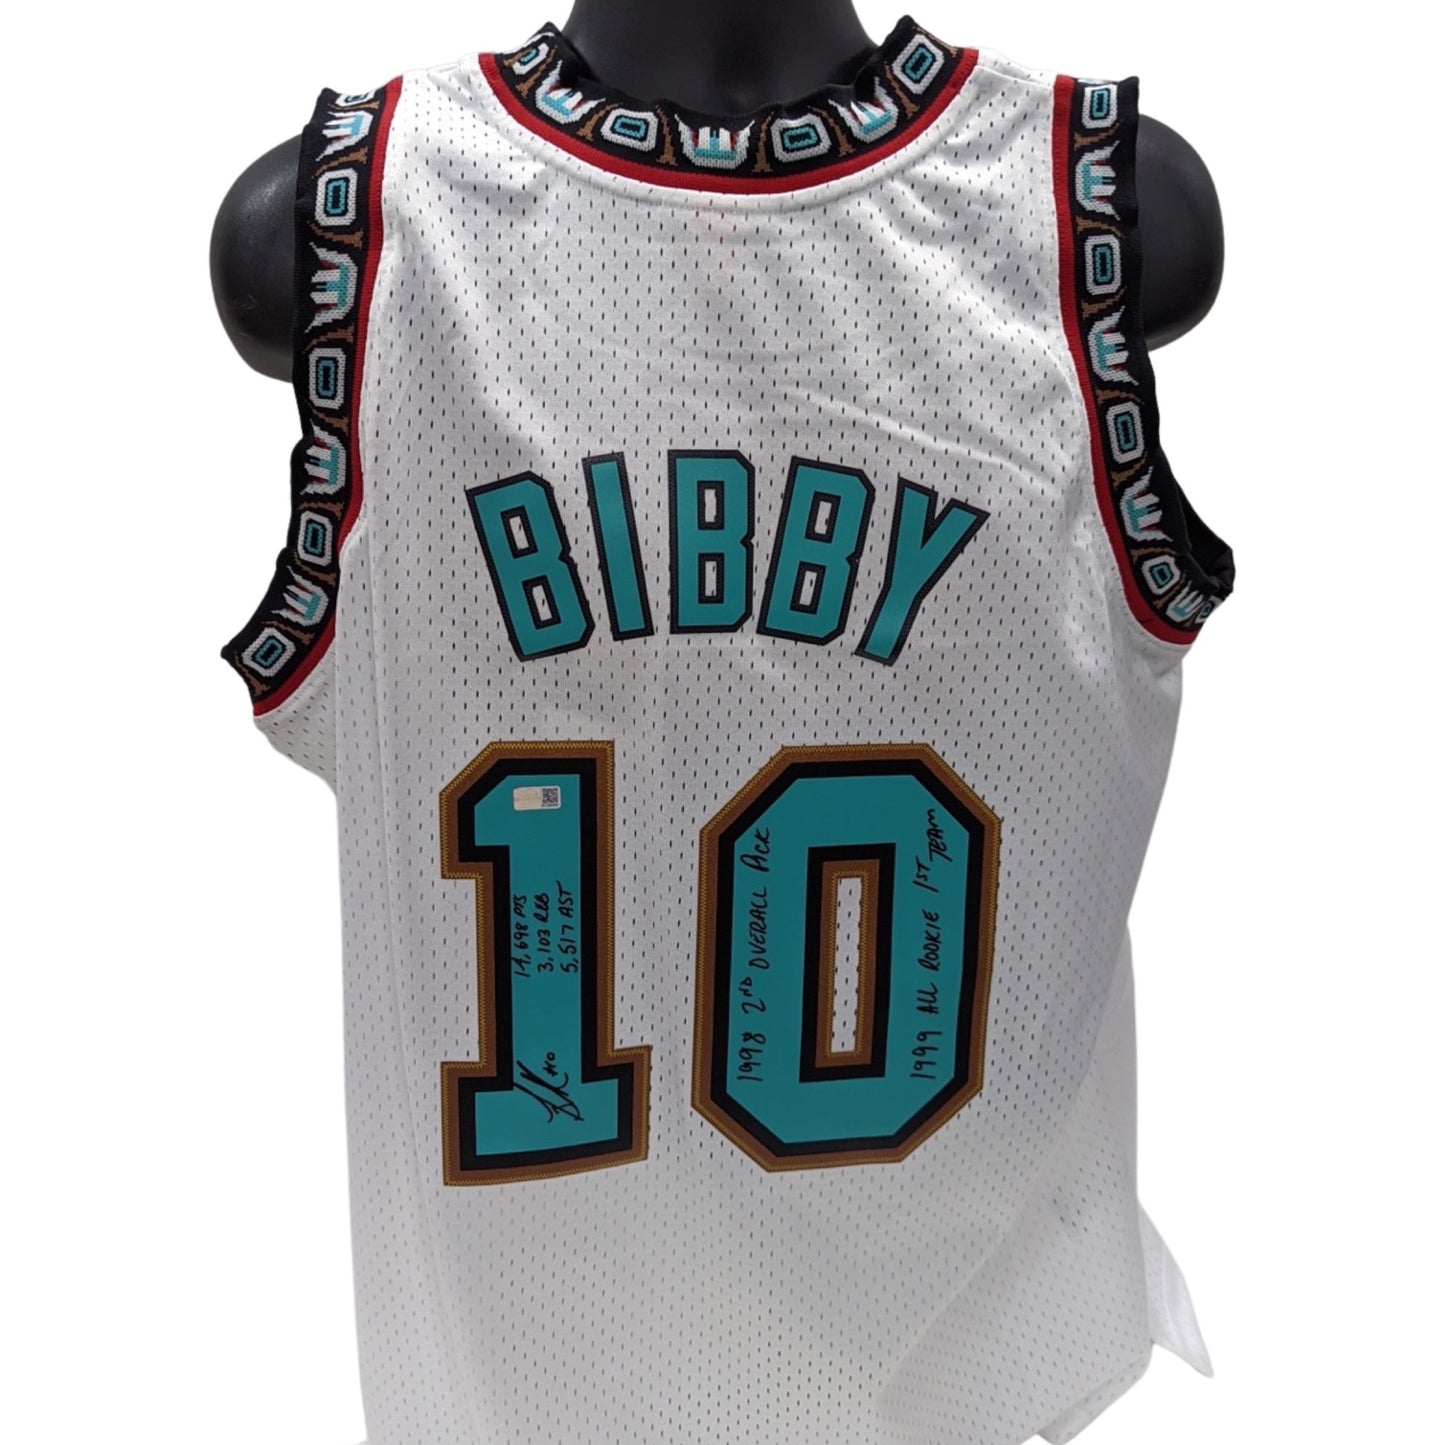 Mike Bibby Autographed Vancouver Grizzlies White Mitchell & Ness Swingman Jersey “14,698 PTS, 3,103 REB, 5,517 AST, 1998 2nd Overall Pick, 1999 All Rookie 1st Team” Inscriptions Steiner CX